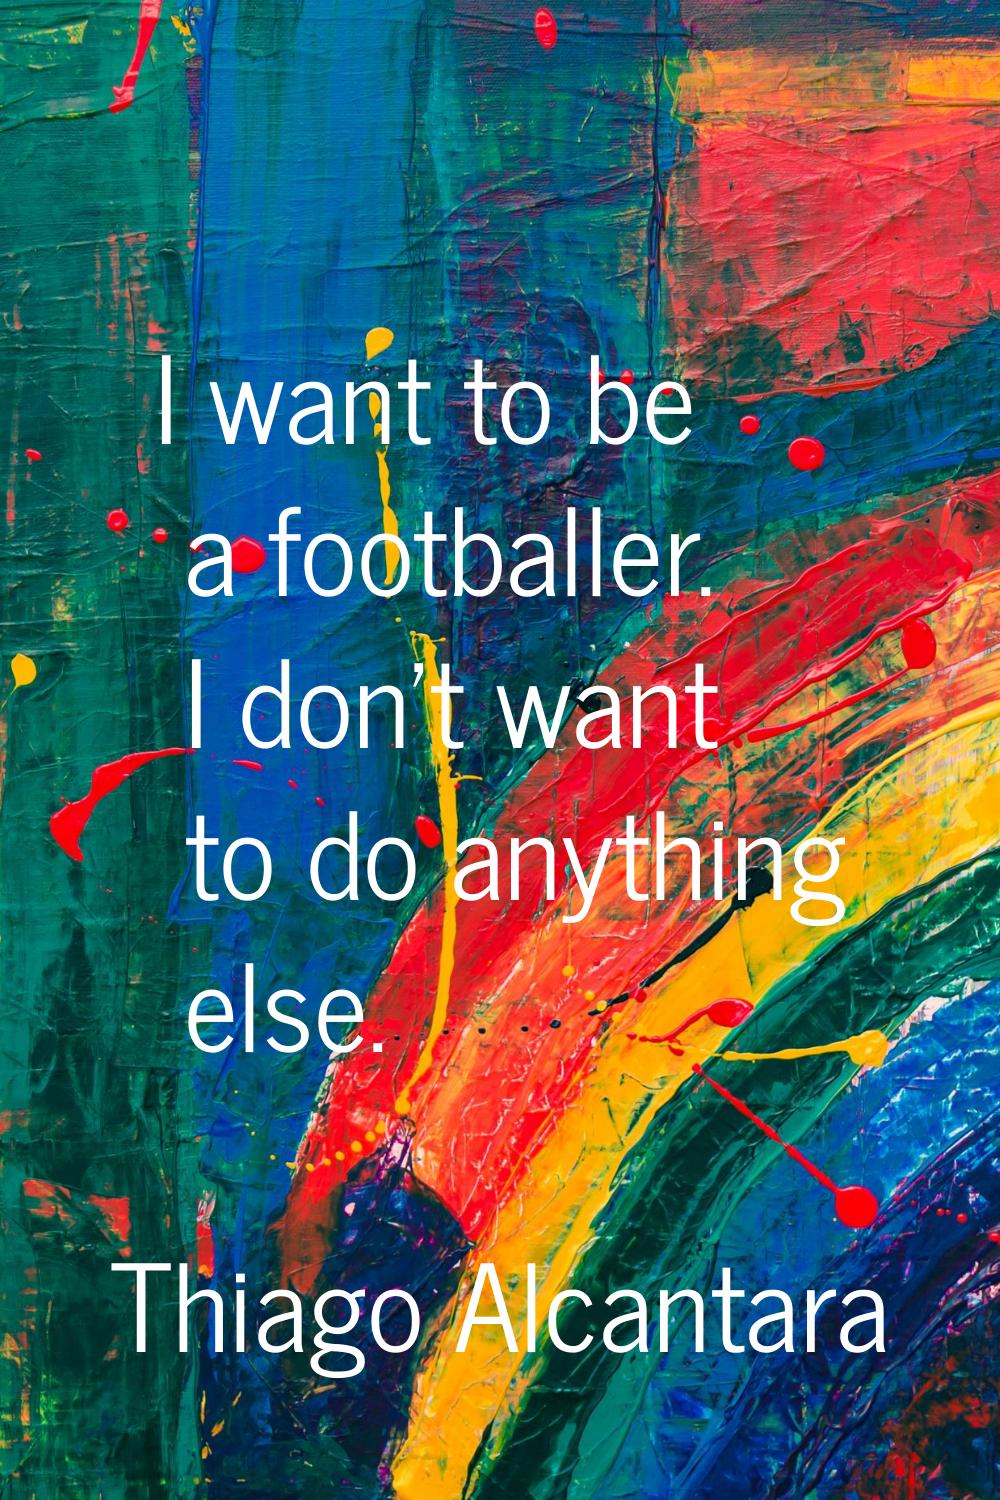 I want to be a footballer. I don't want to do anything else.